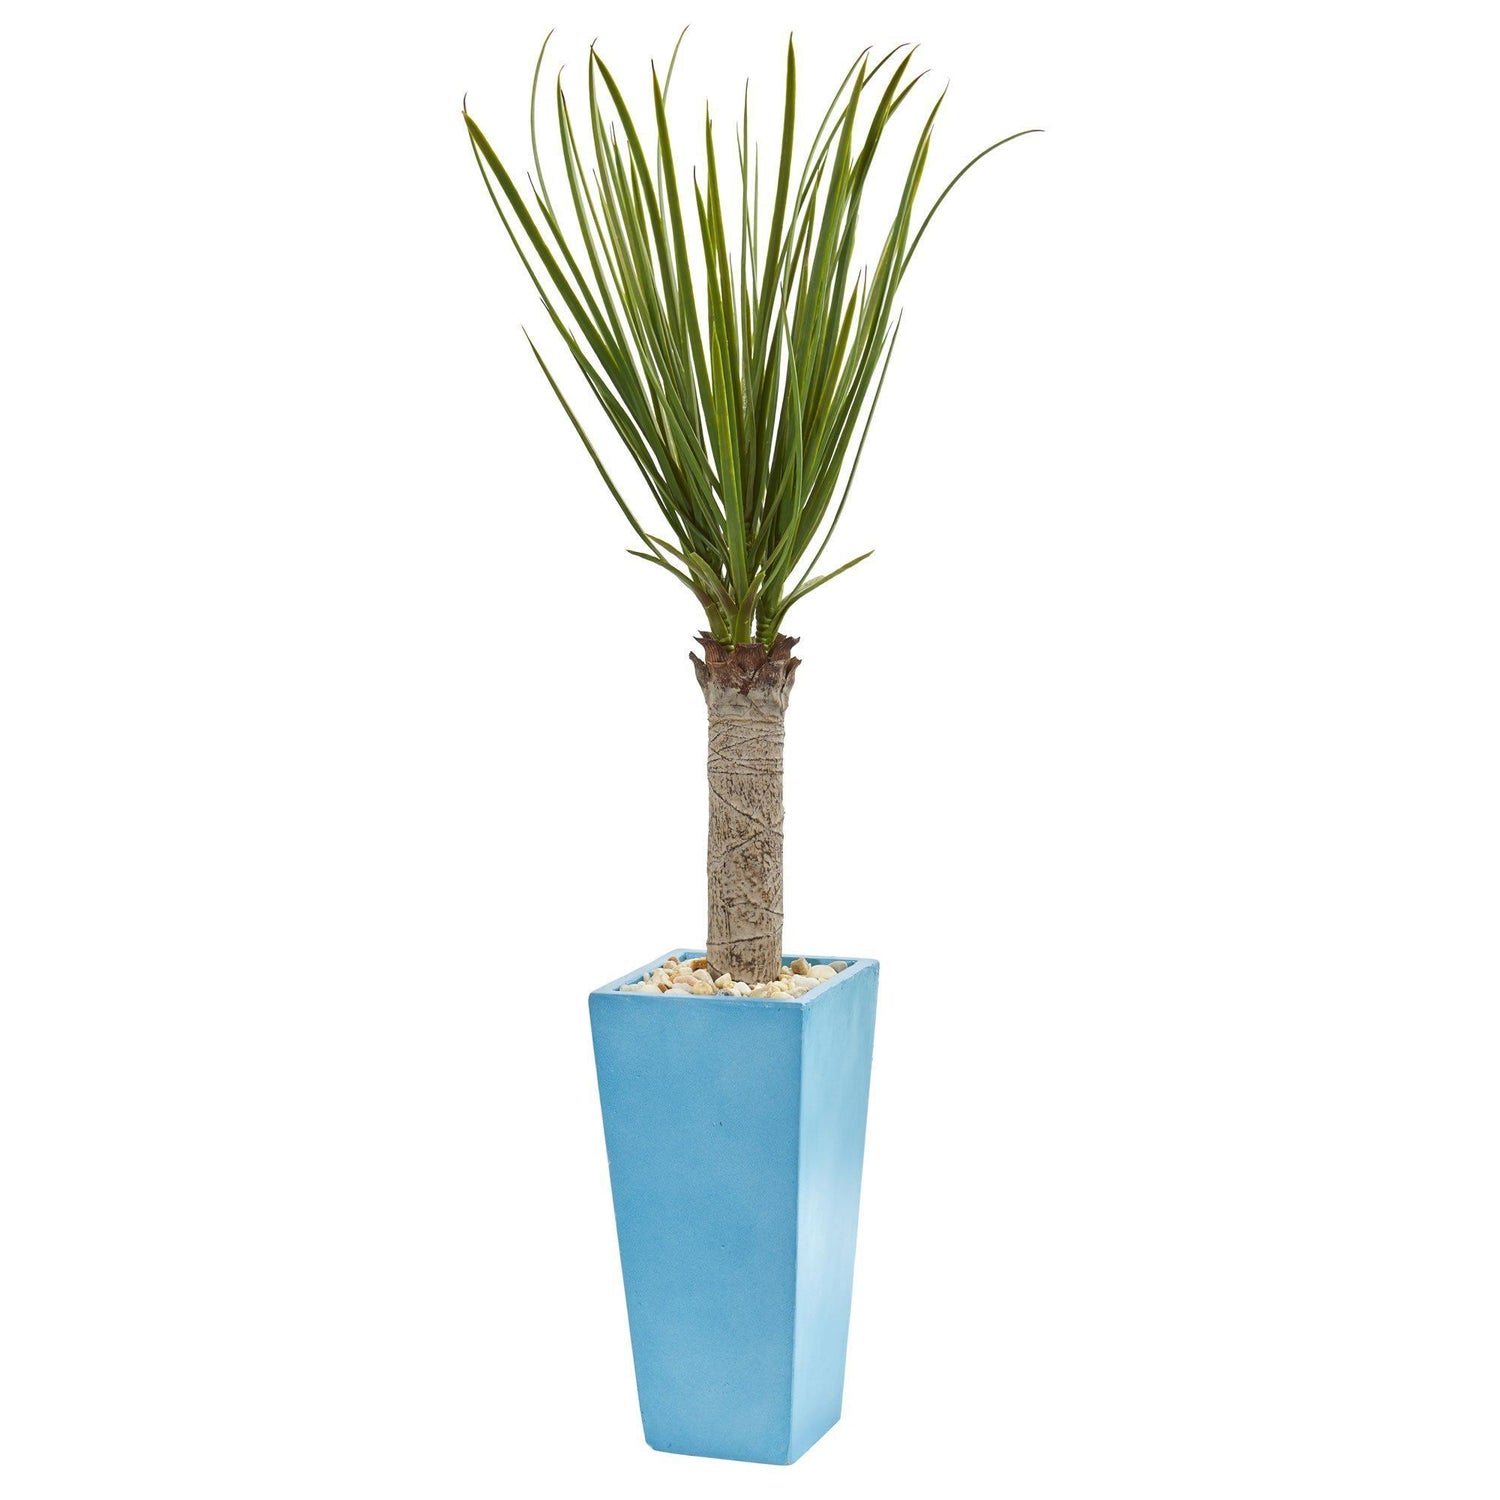 4’ Yucca Artificial Tree in Turquoise Planter